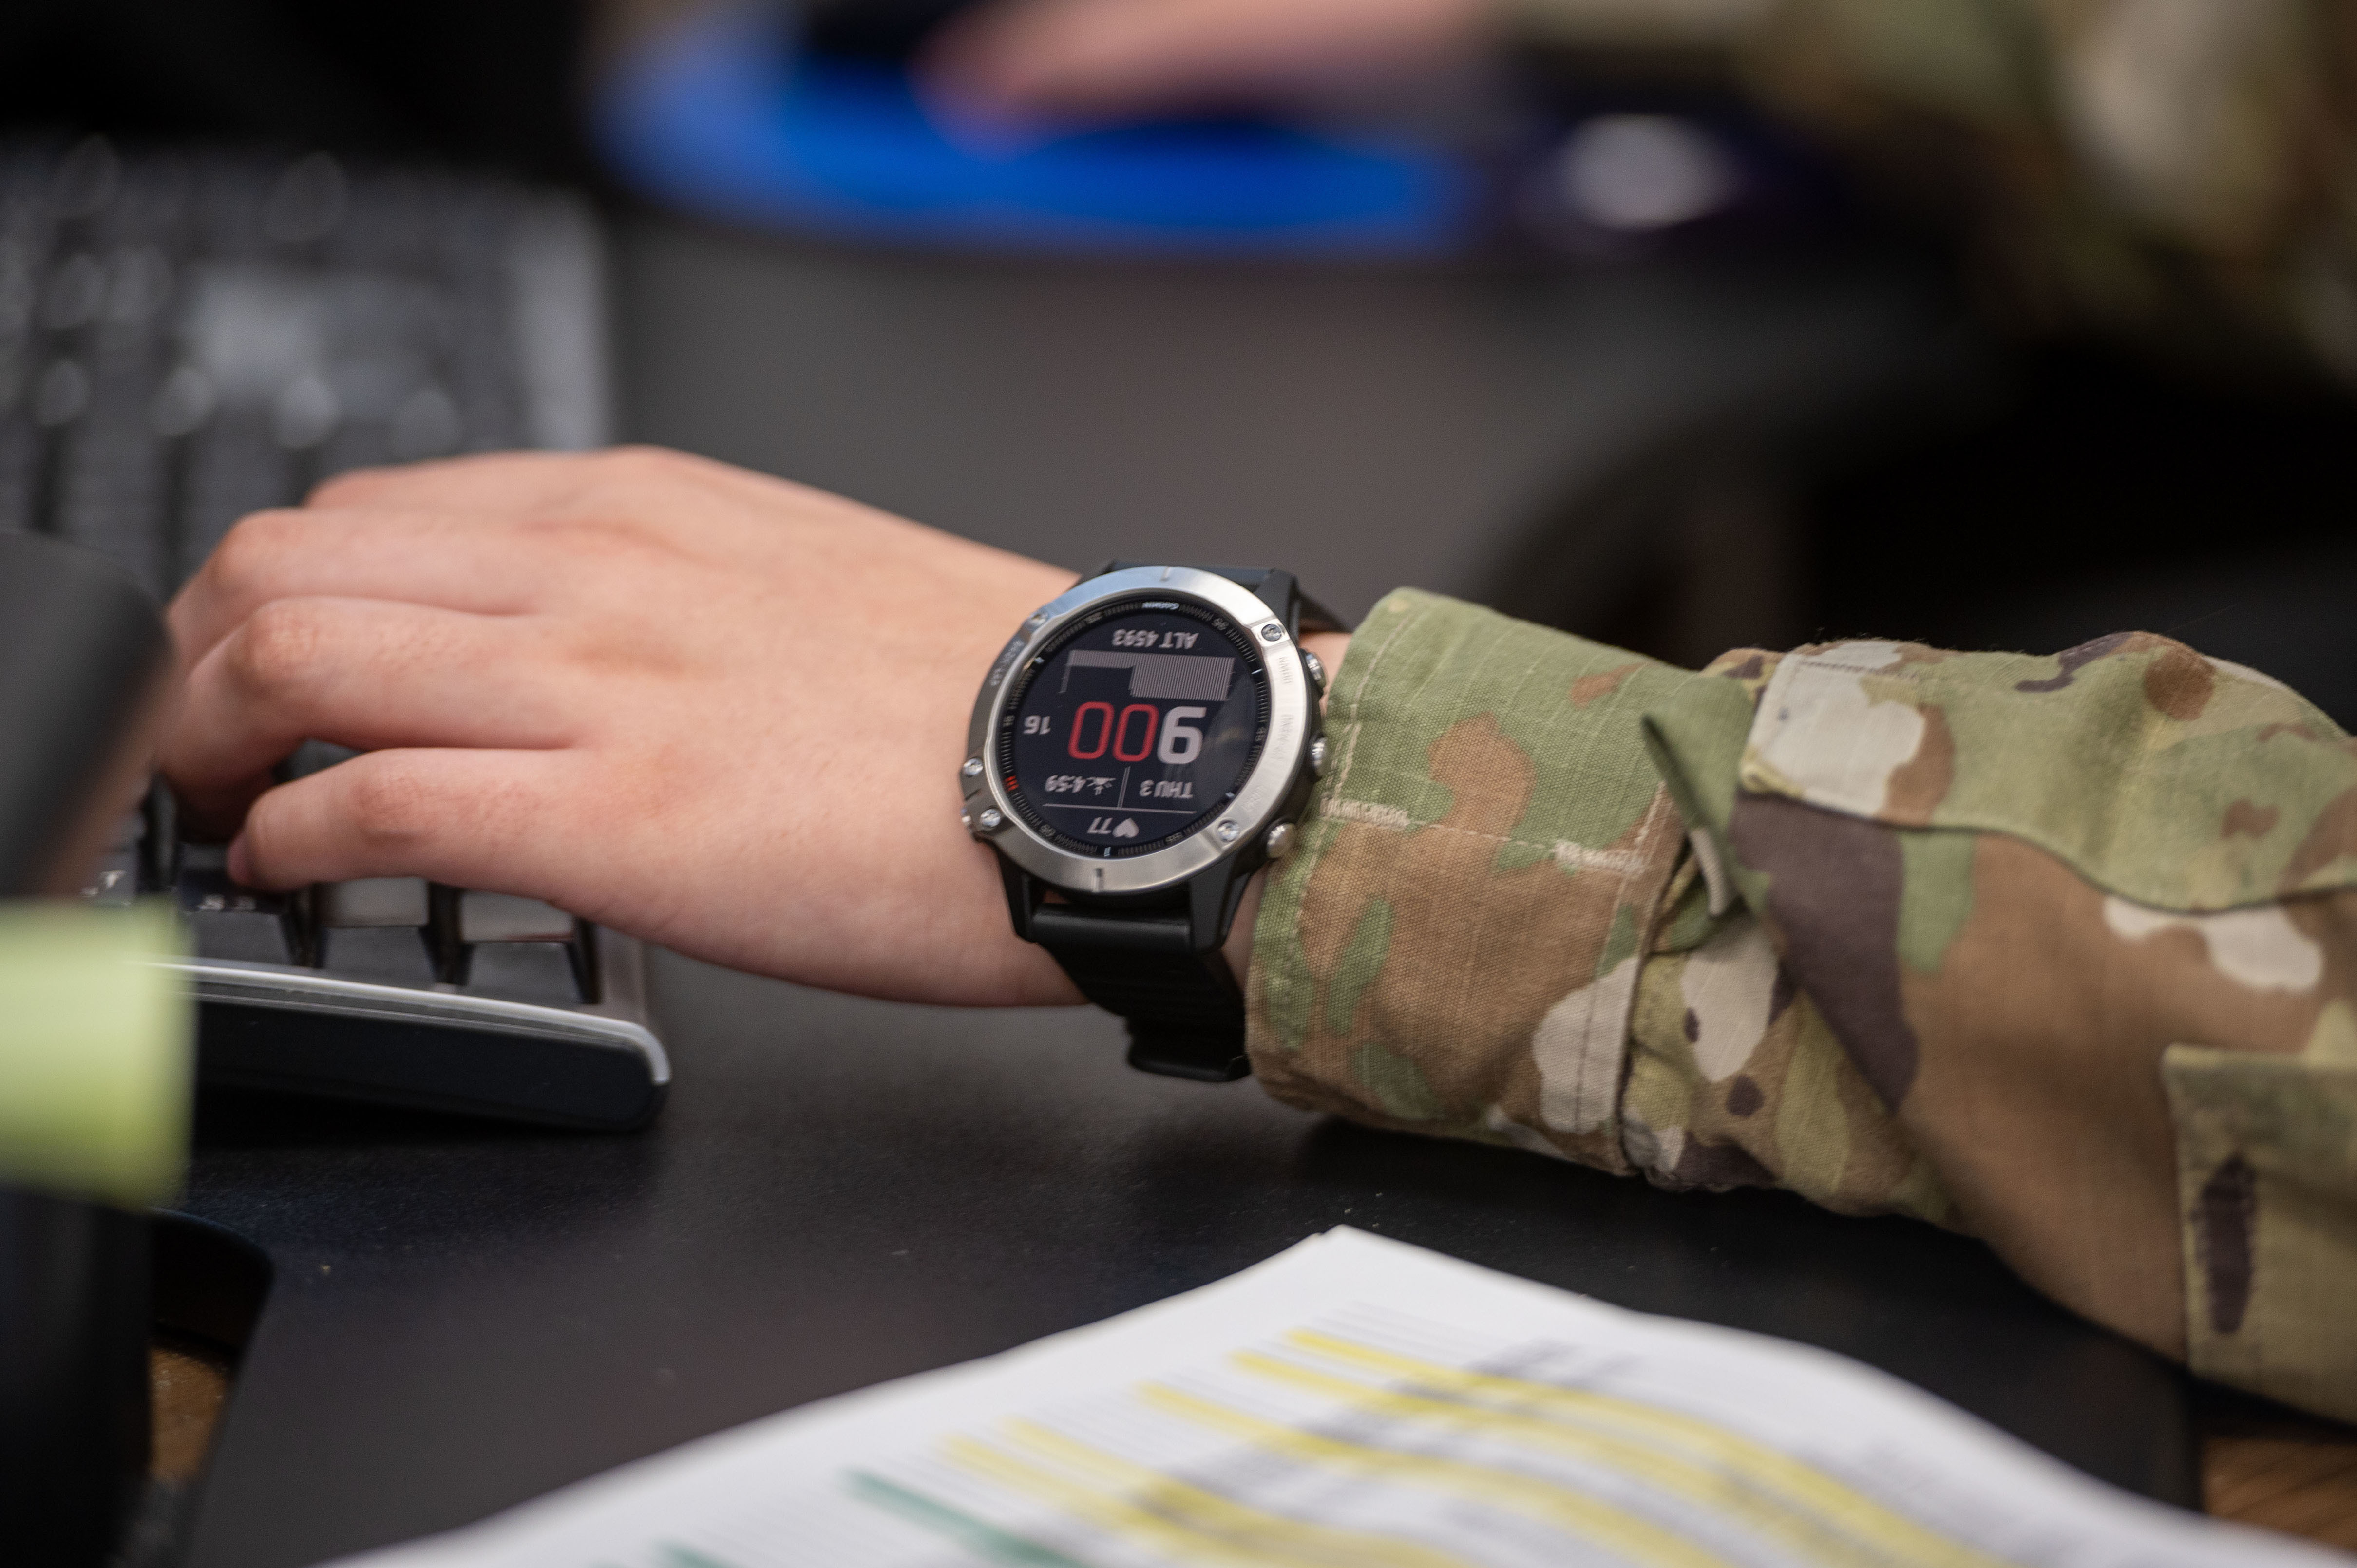 An Airman wears a watch as part of the wearable technology